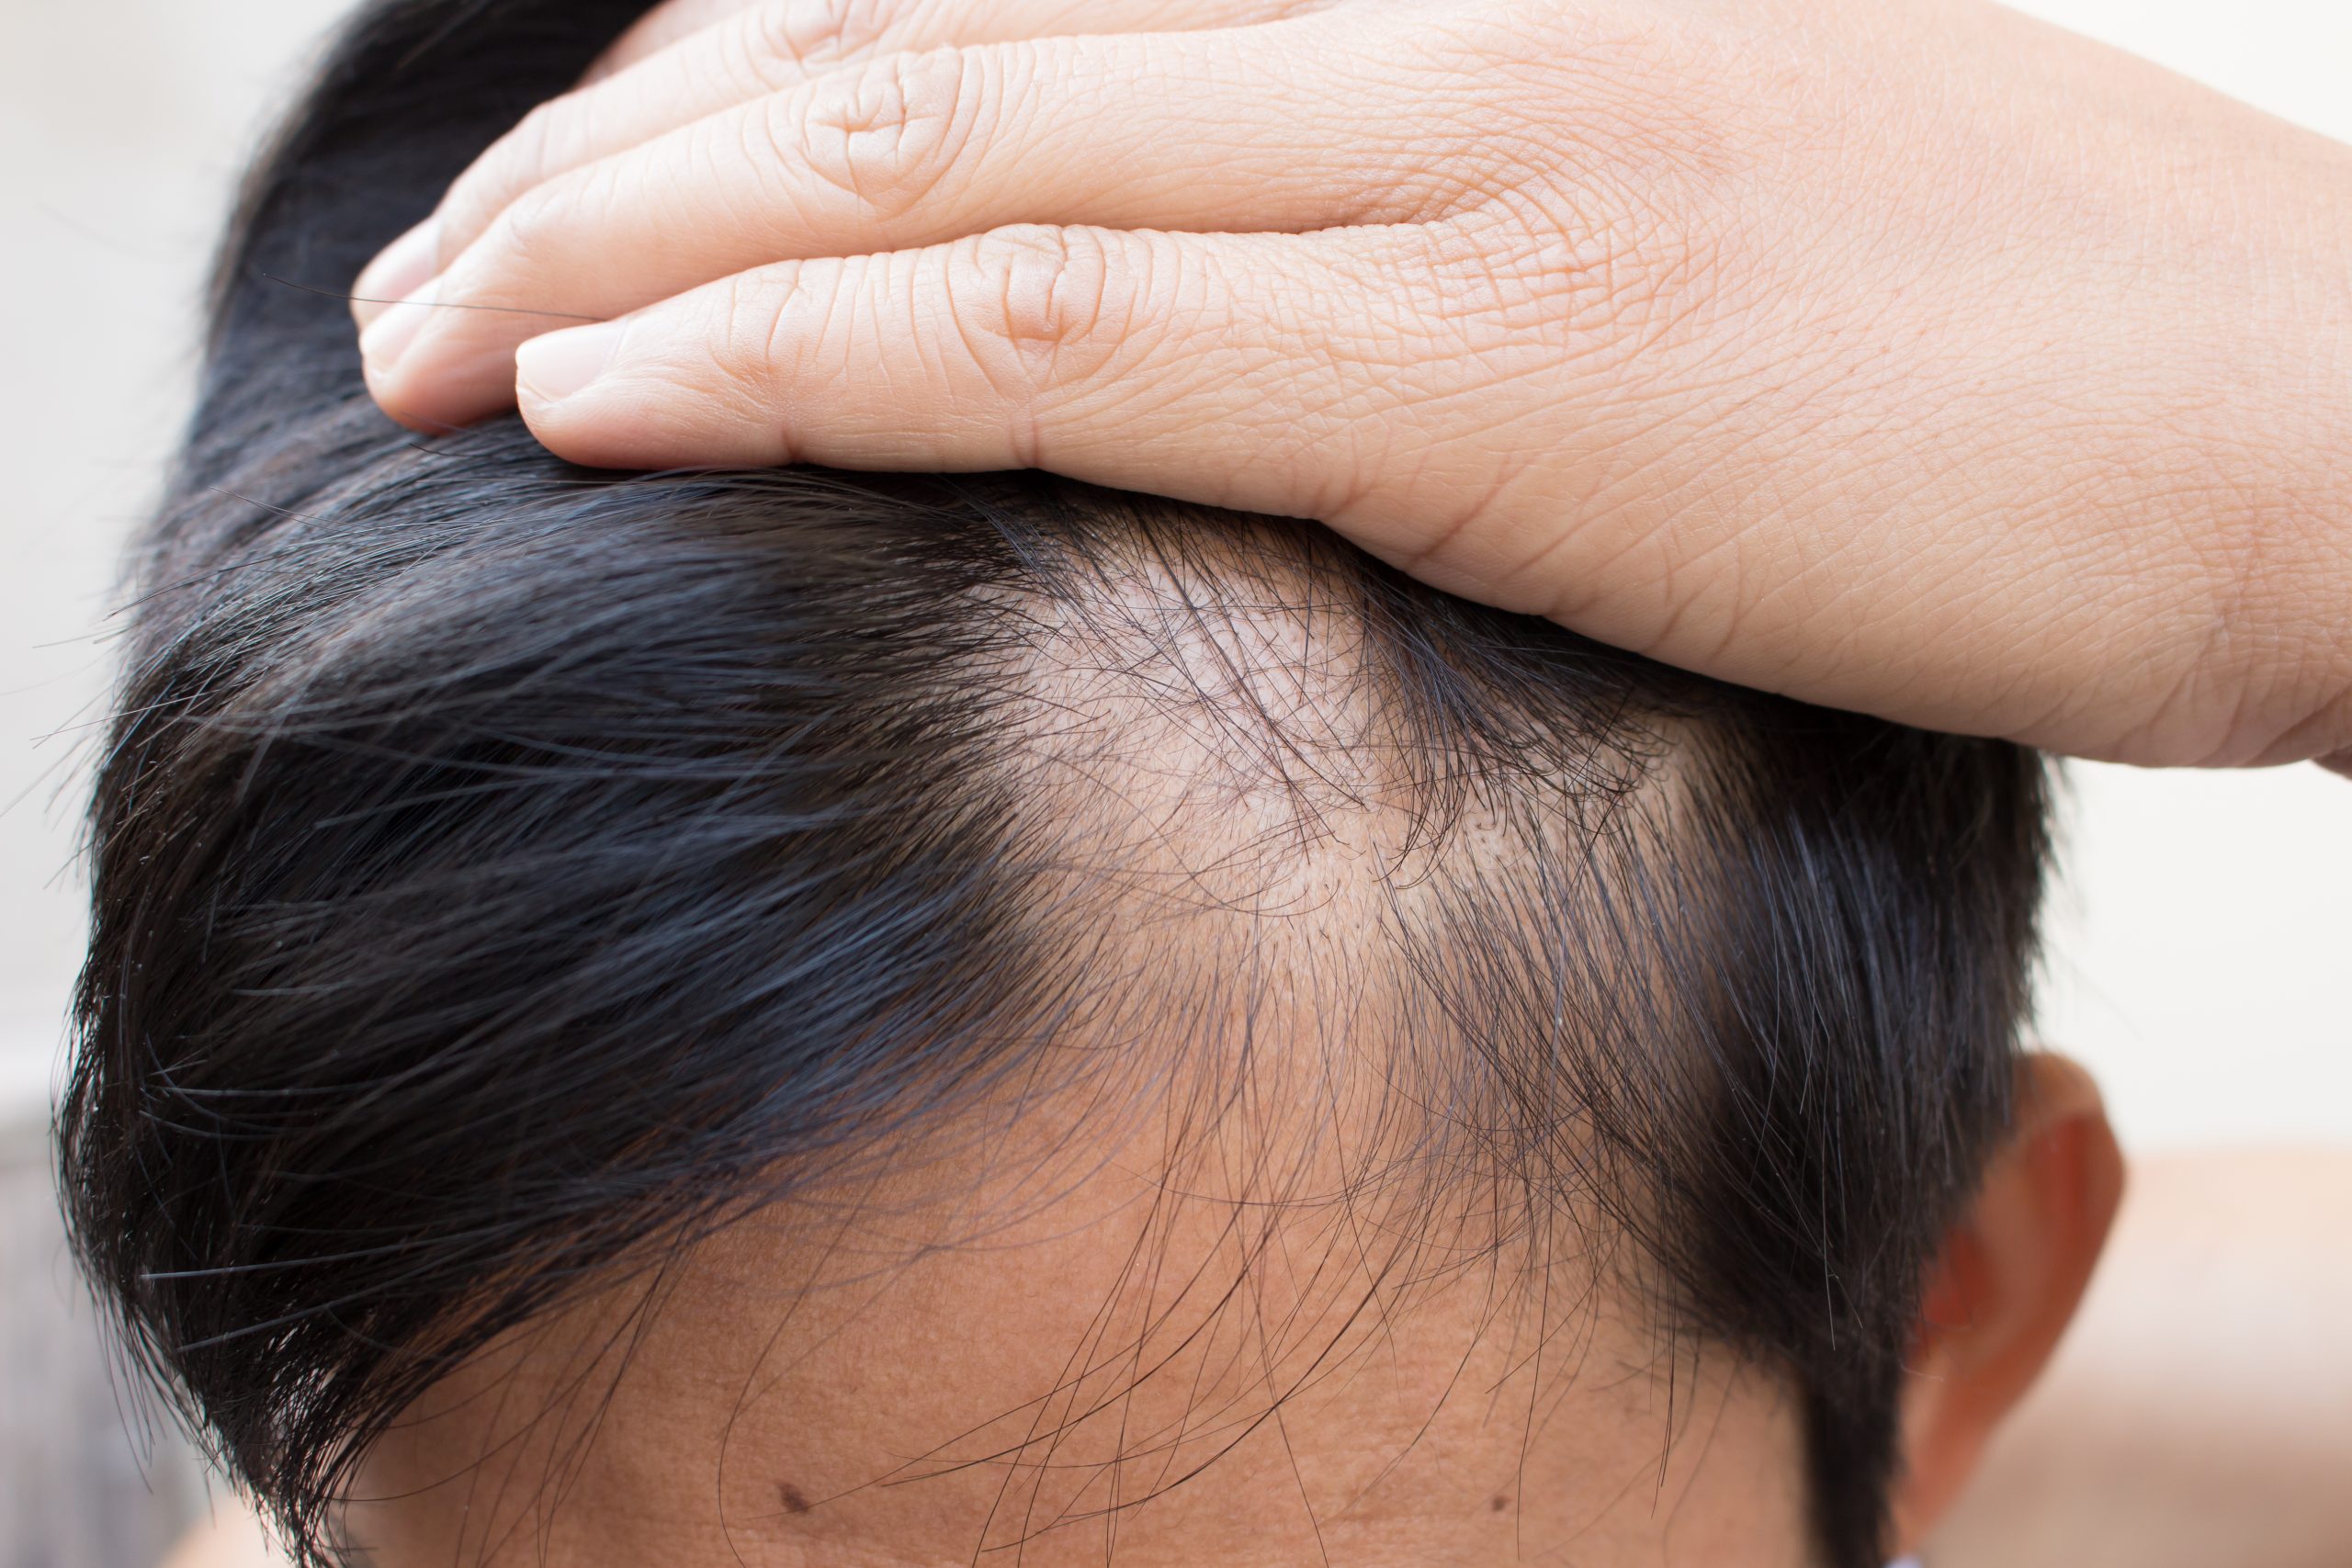 Hair loss: Causes, Treatment & Prevention | AROMASE